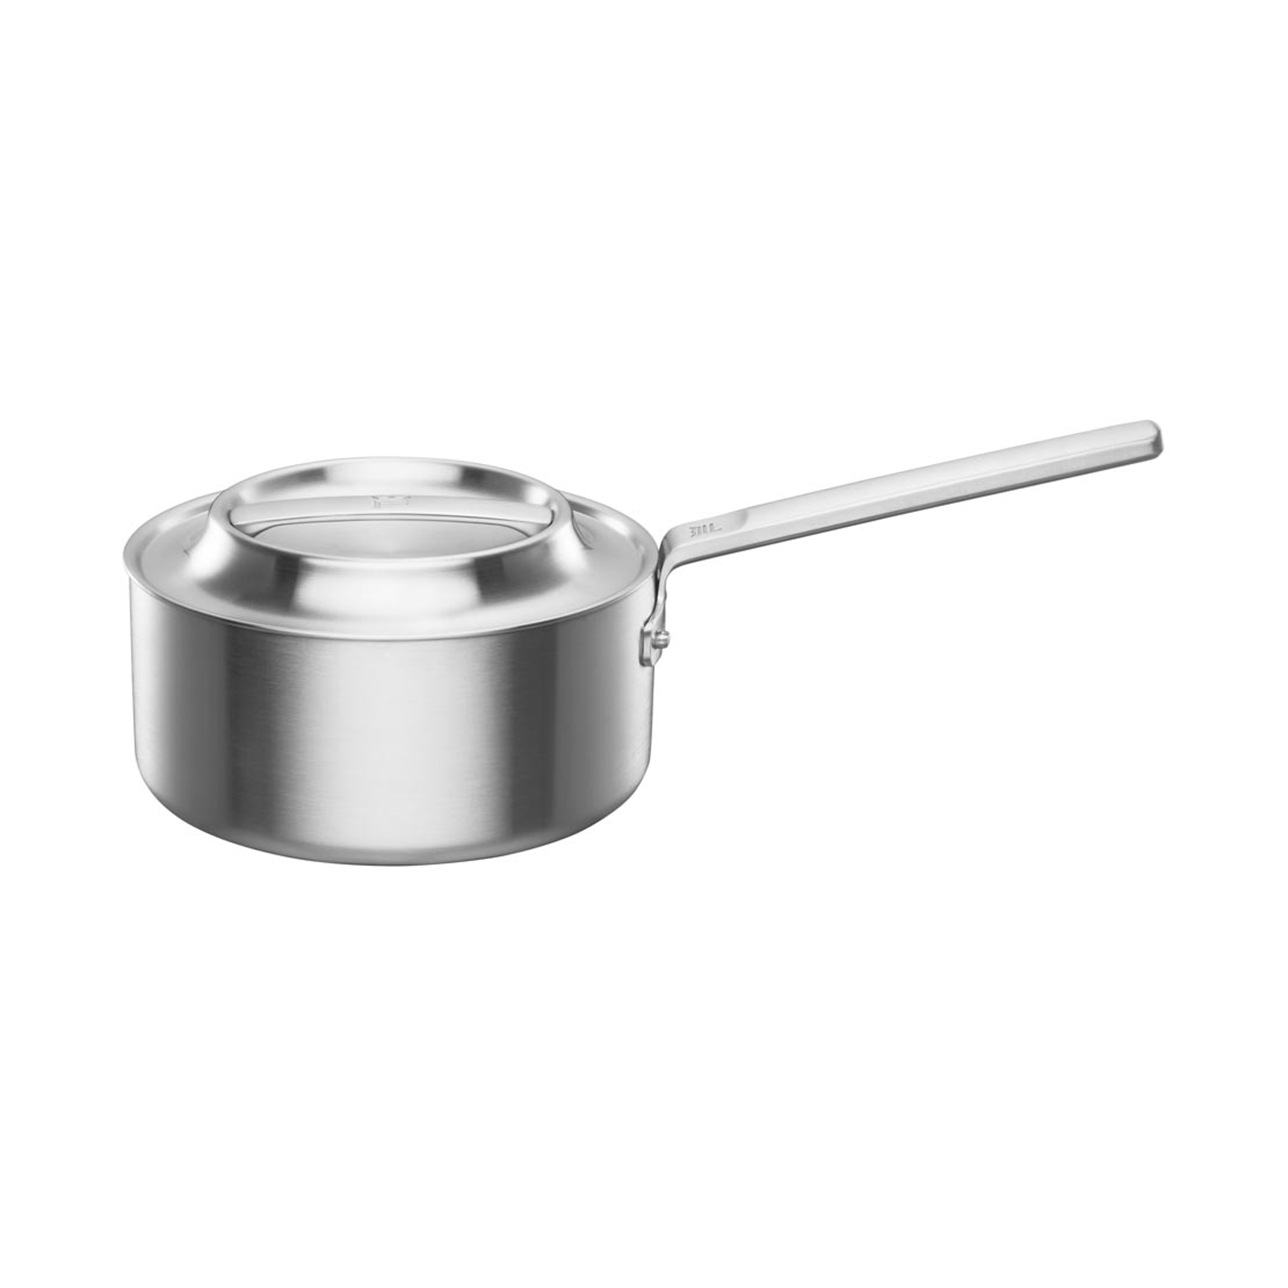 Norden Saucepan Uncoated Stainless Steel, 2,5 L